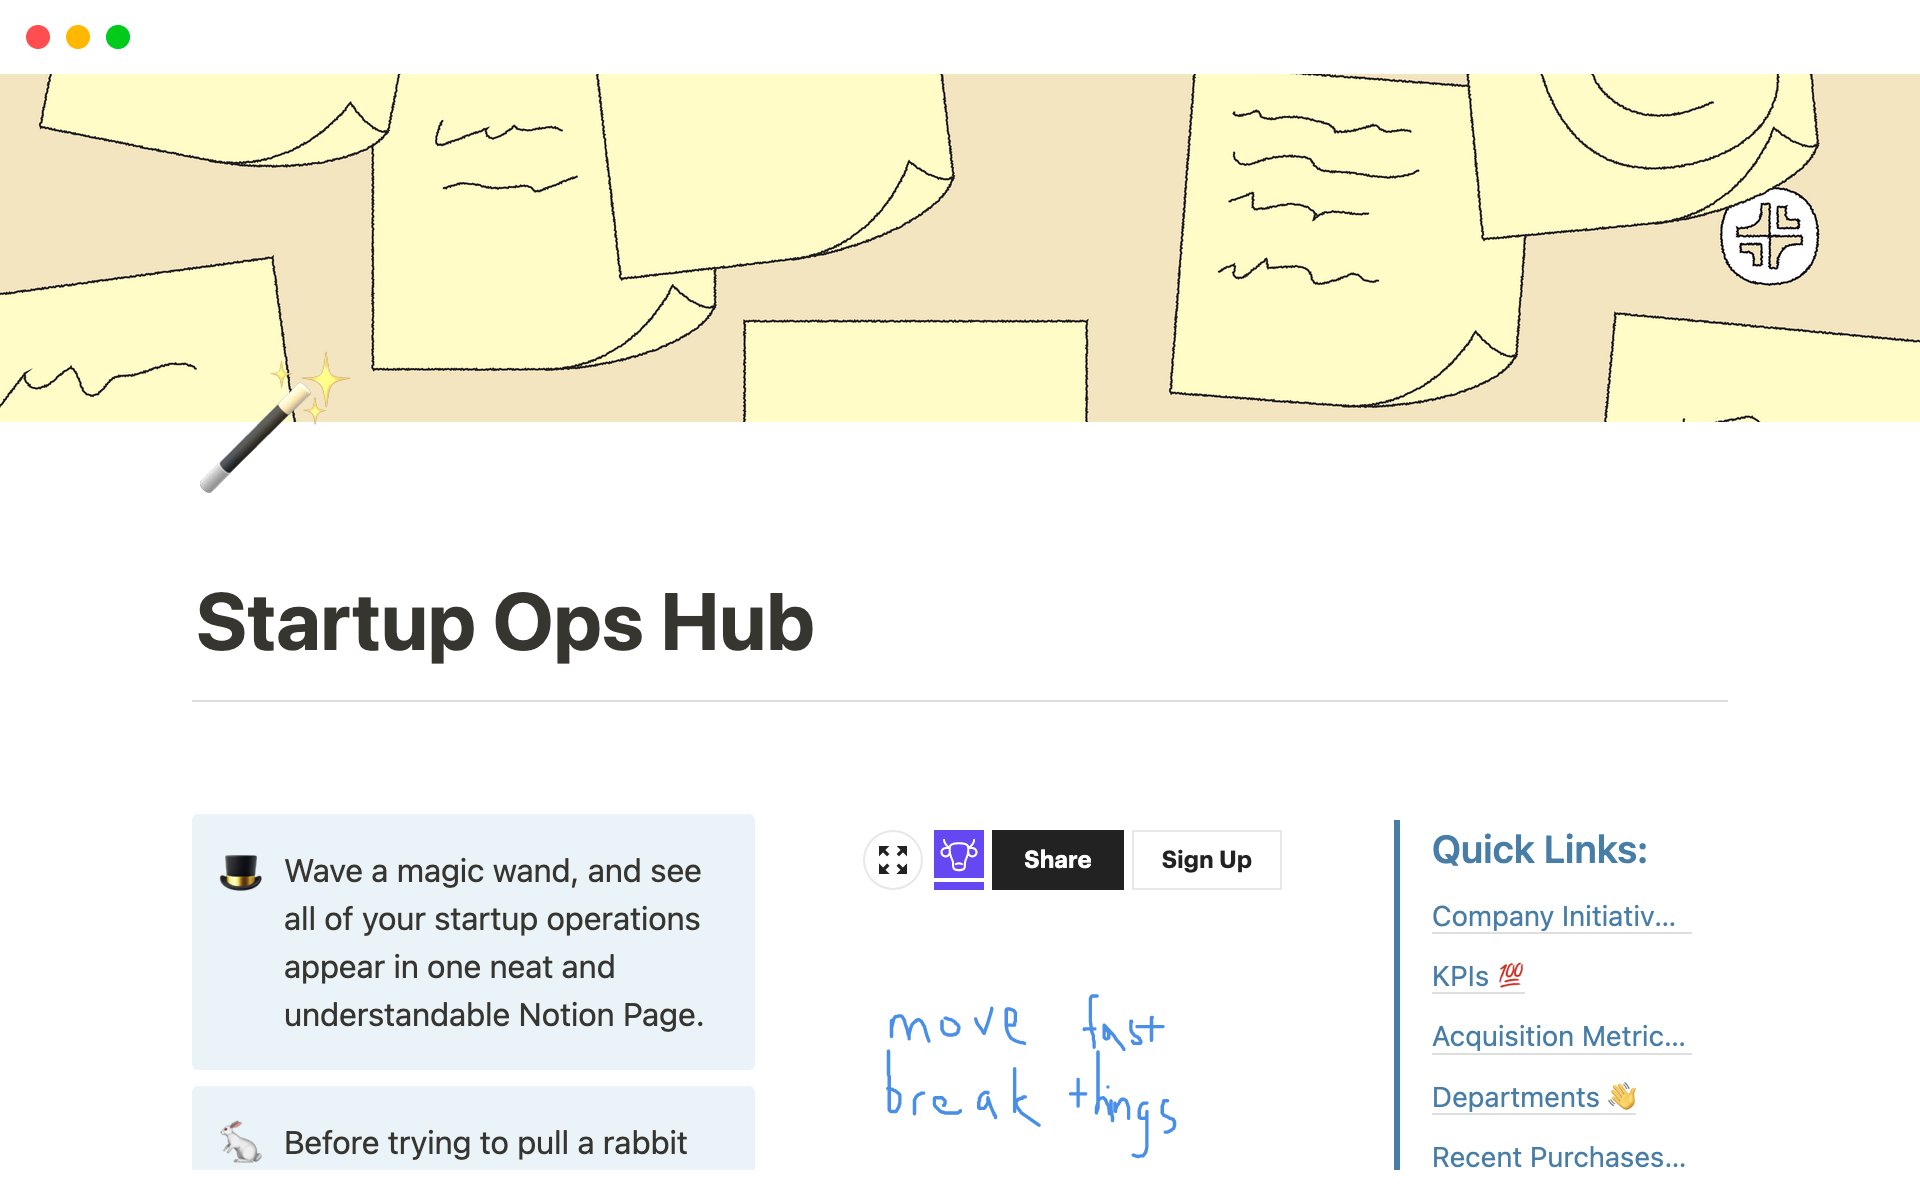 Startup Ops Hub make it easy for startups, executives, and ops teams to start organizing their projects and priorities in Notion.